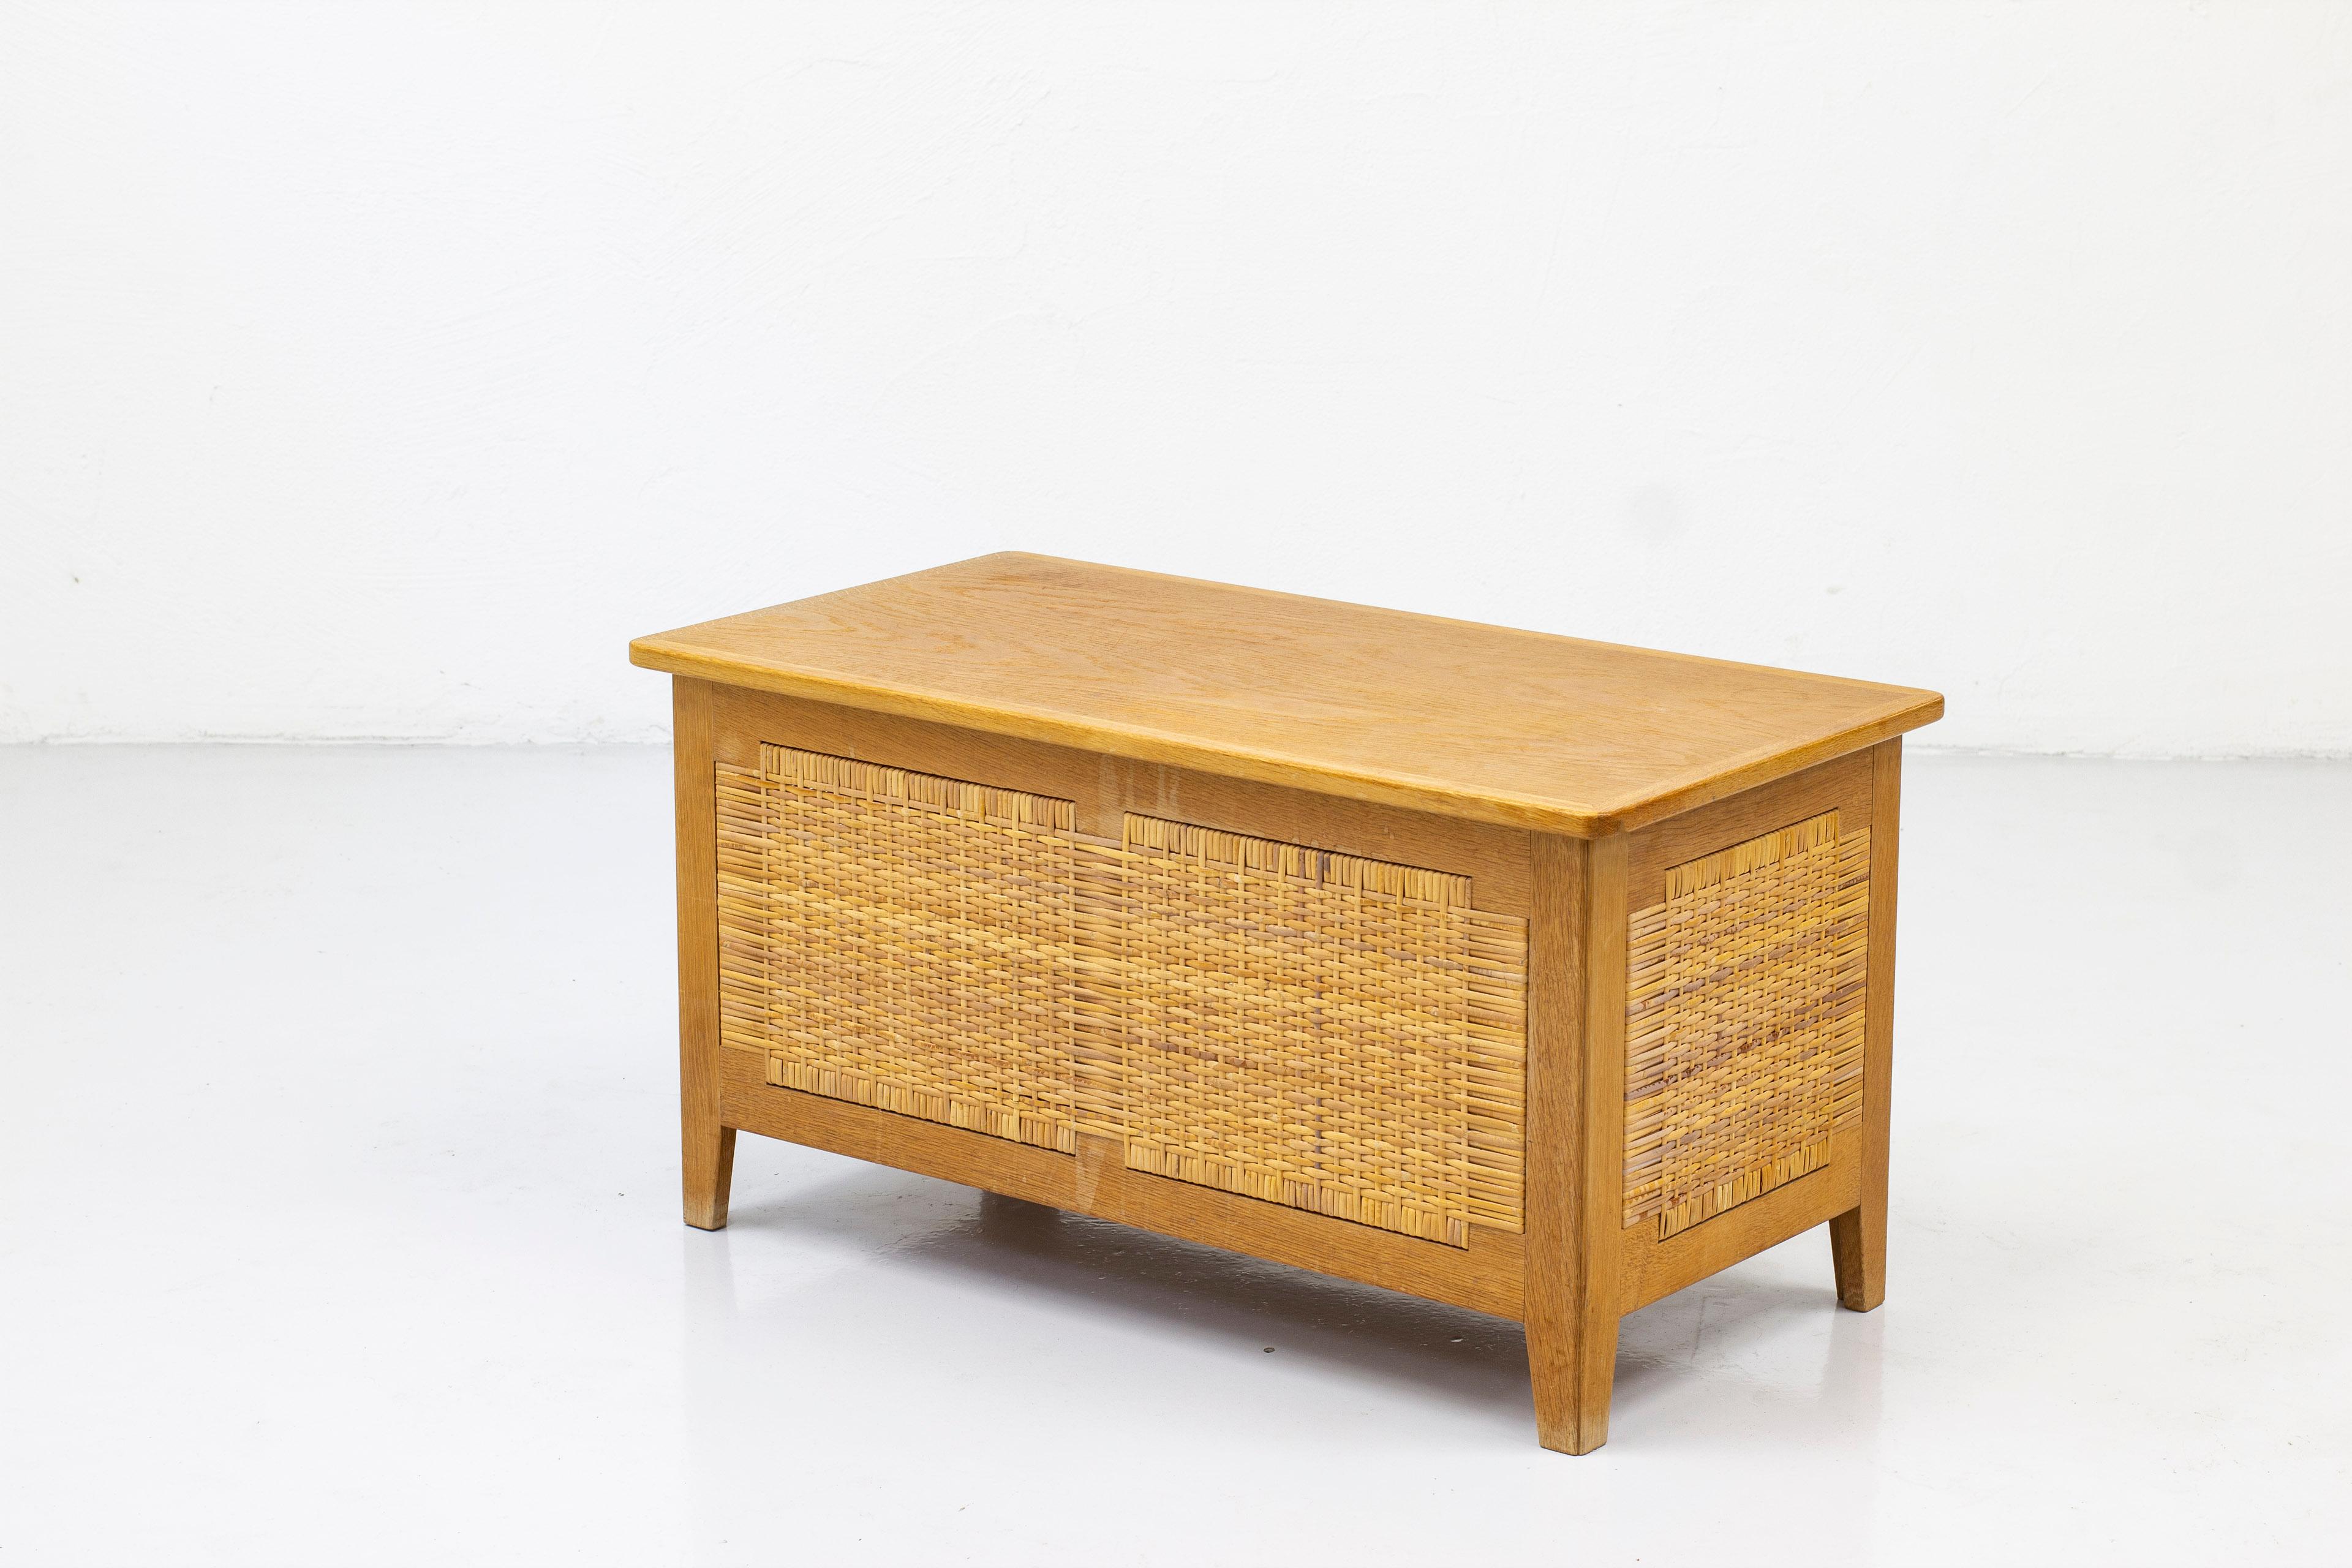 Chest designed by Kai Winding. produced in Denmark during the 1950s by Poul Hundevad . Made from oak with hand woven cane and patinated brass hardware. Very good condition with few signs of age related wear and patina.

A striking Danish modern